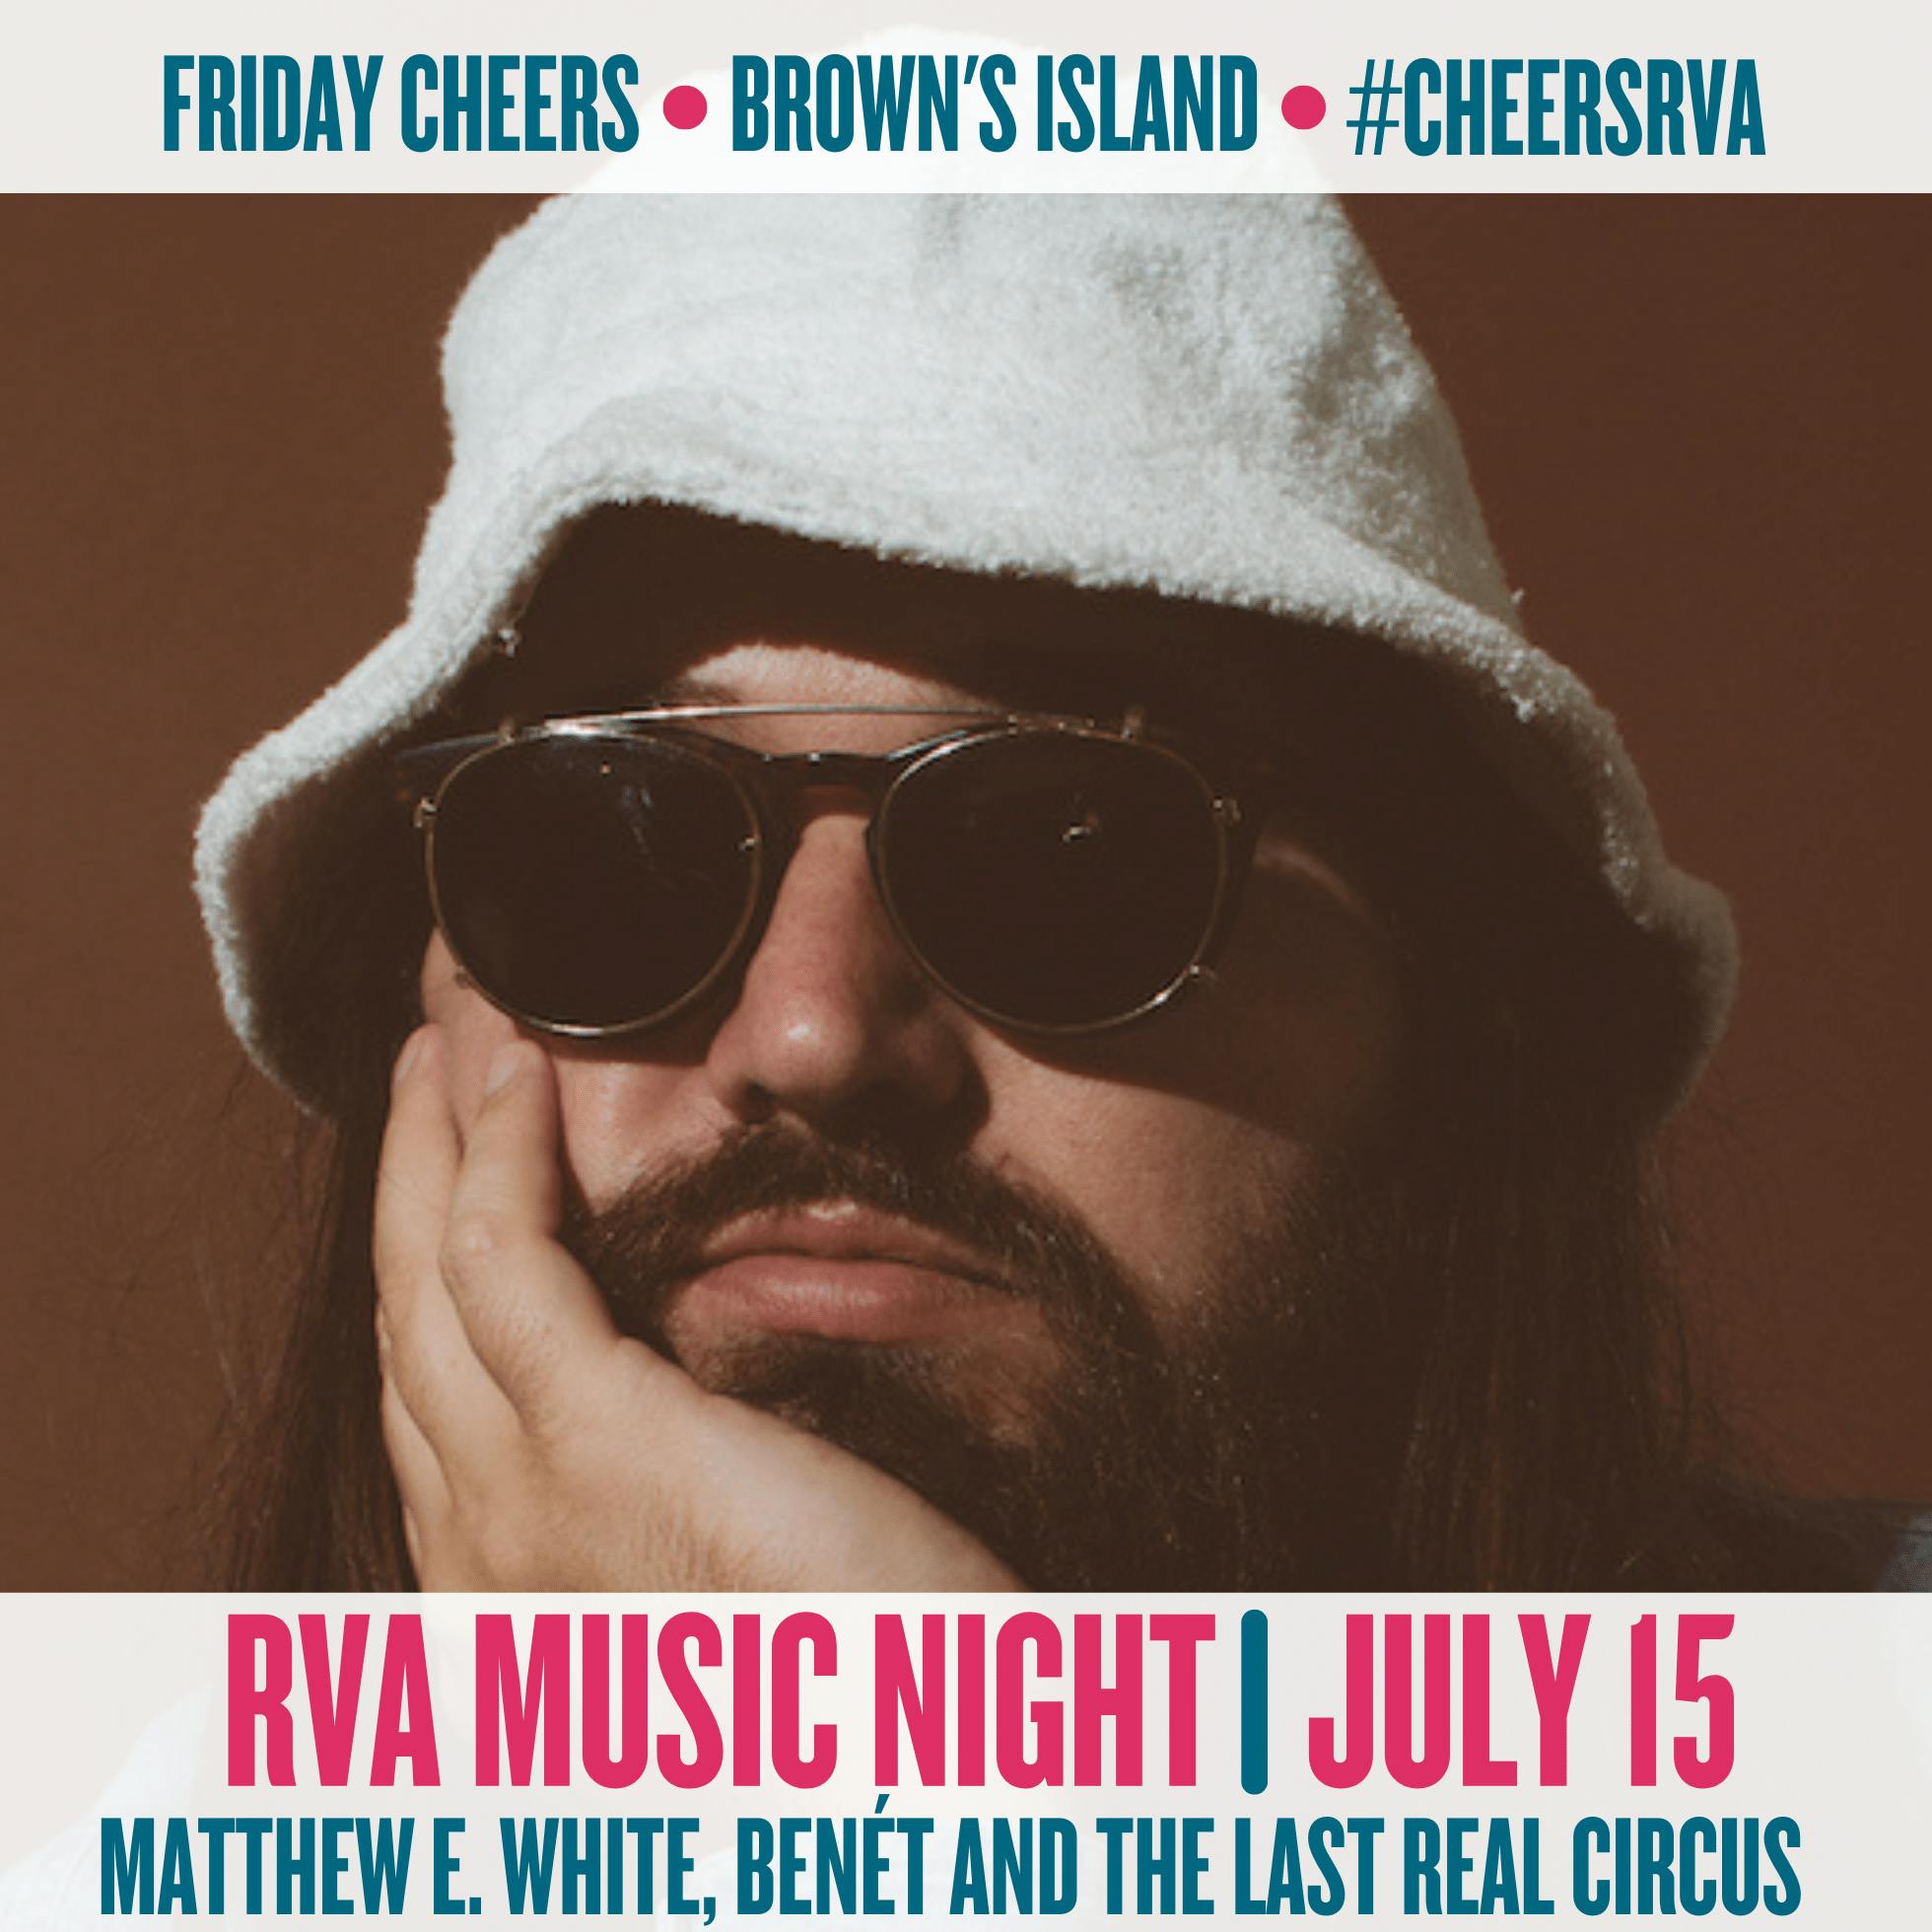 RVA Music Night with Matthew E. White, Benét and The Last Real Circus at Friday Cheers in Richmond, Virginia